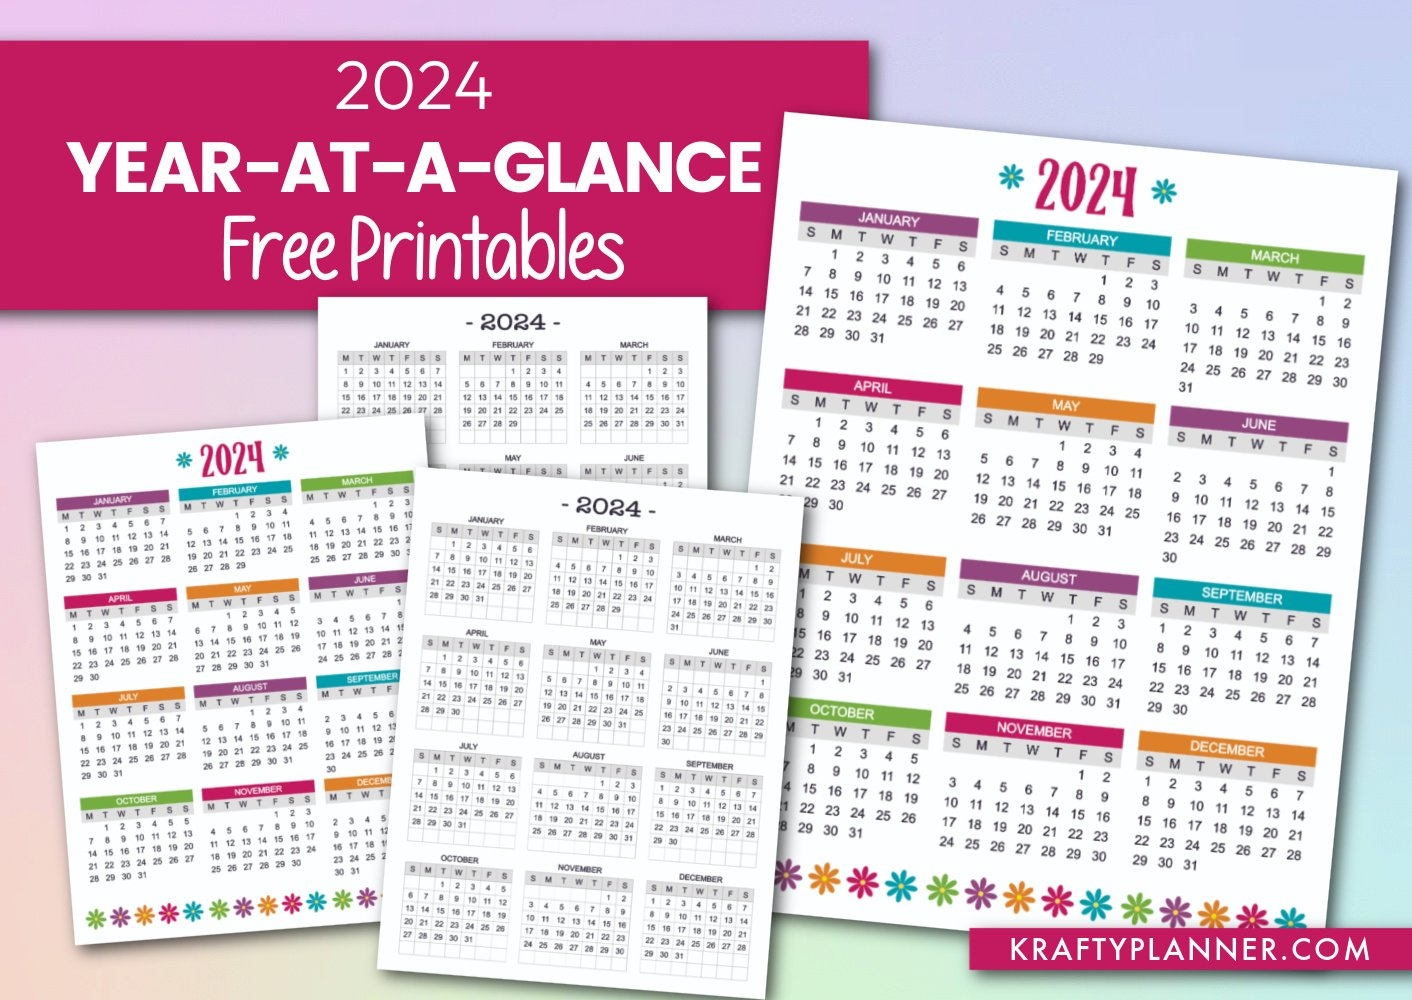 Free Printable 2024 Year-At-A-Glance Calendar — Krafty Planner within Free Printable Calendar 2024 Year With Notes Section